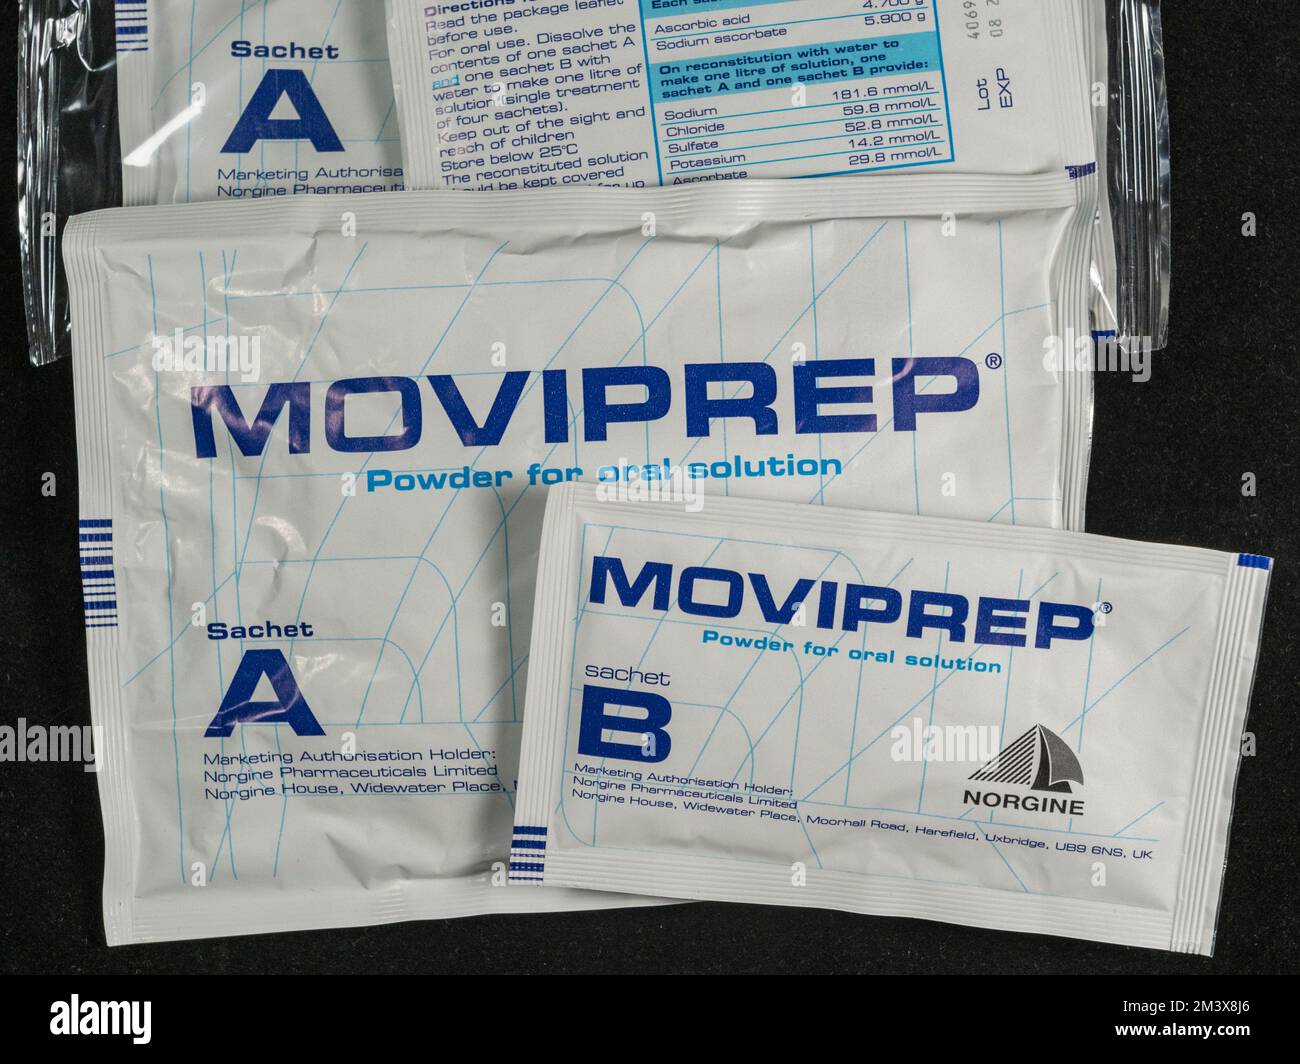 Sachets of Moviprep, a lemon flavored laxative used by patients prior to a colonoscopy in the UK. Stock Photo